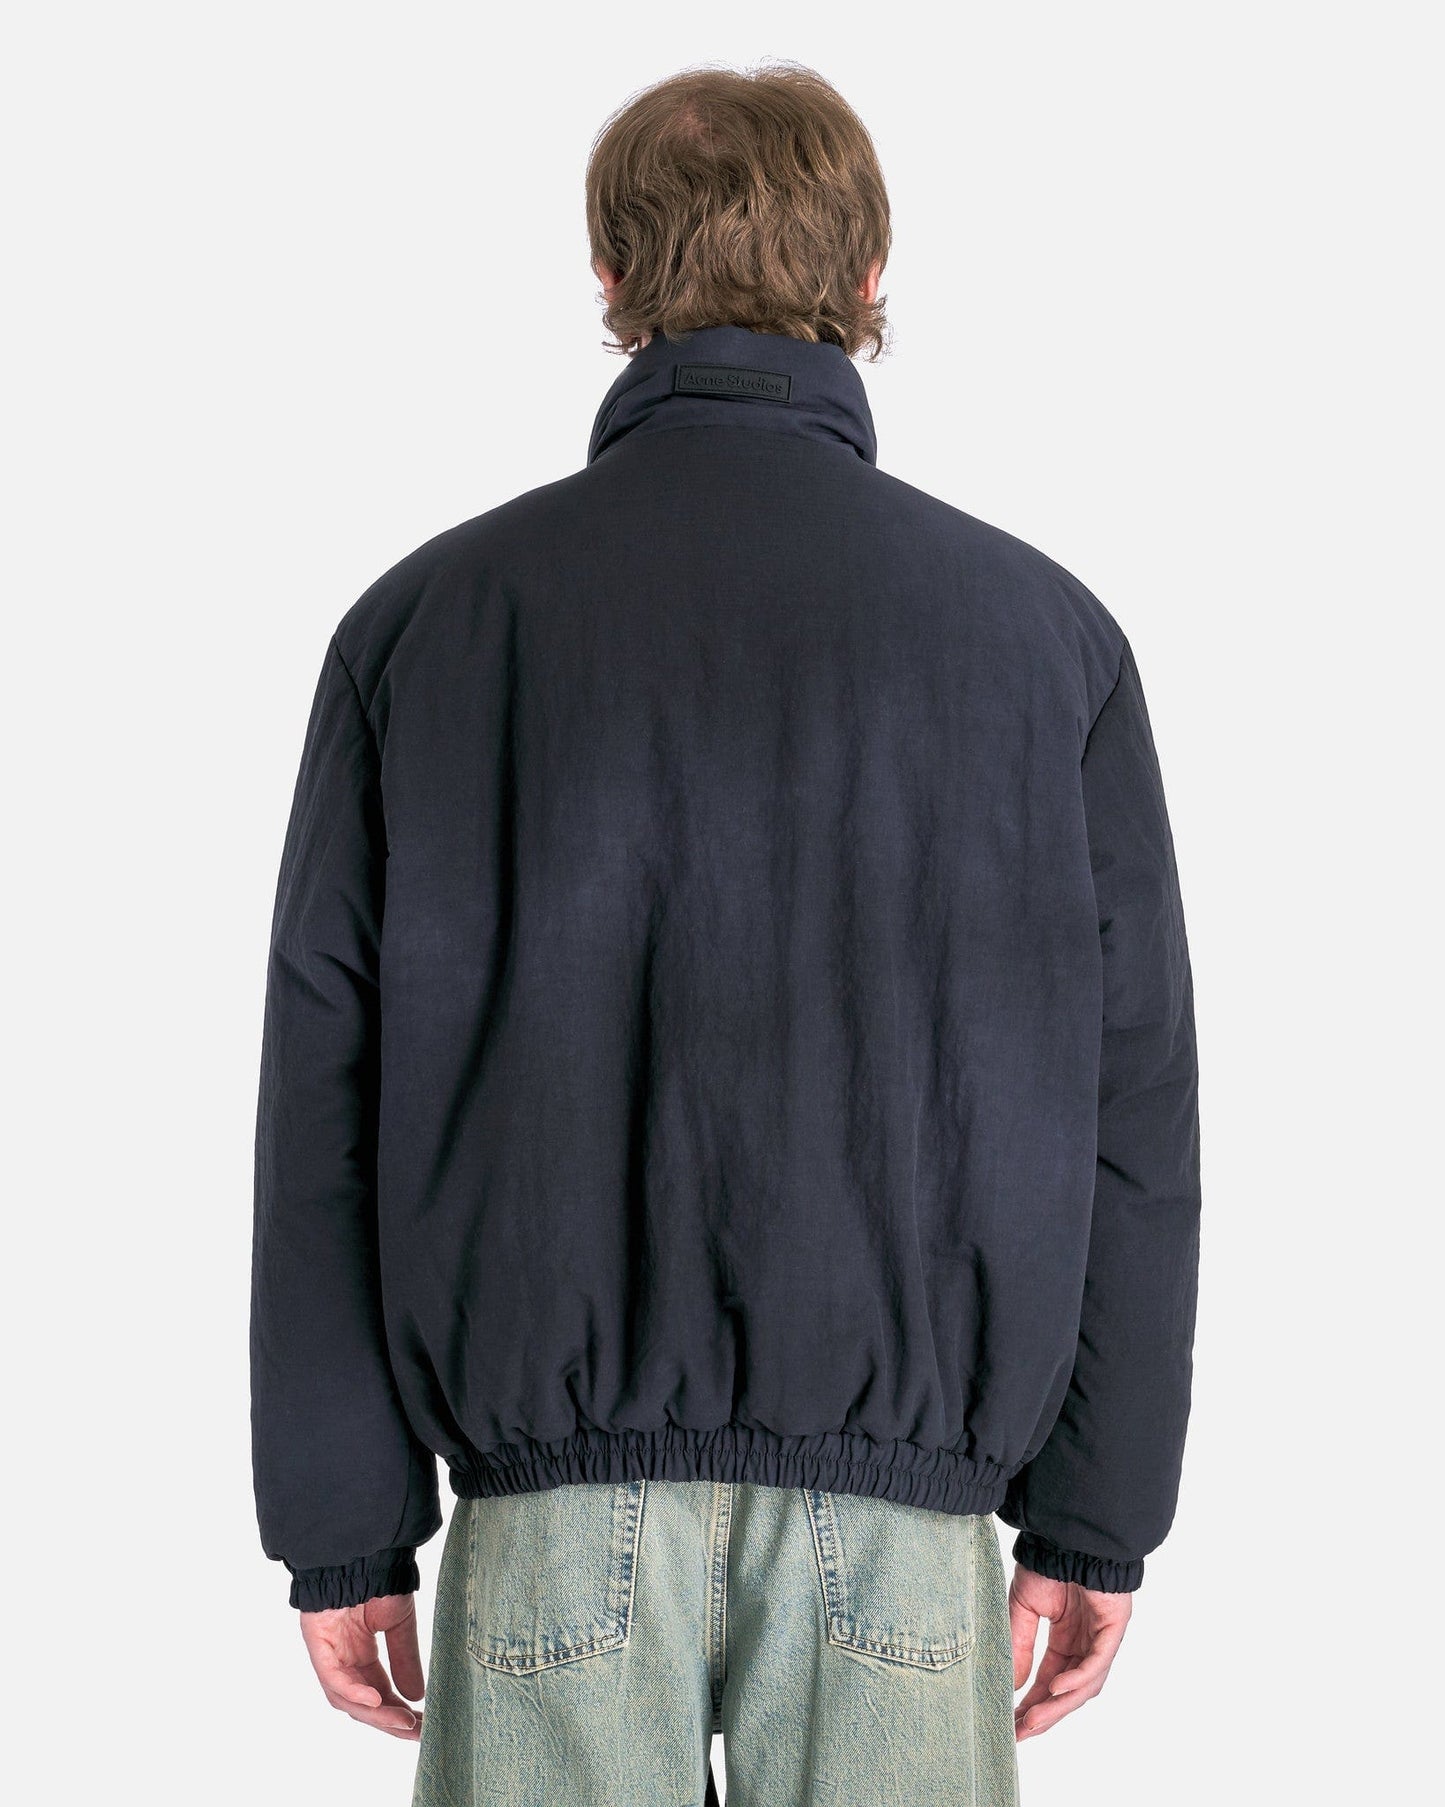 Acne Studios Men's Jackets Dyed Puffer Jacket in Navy